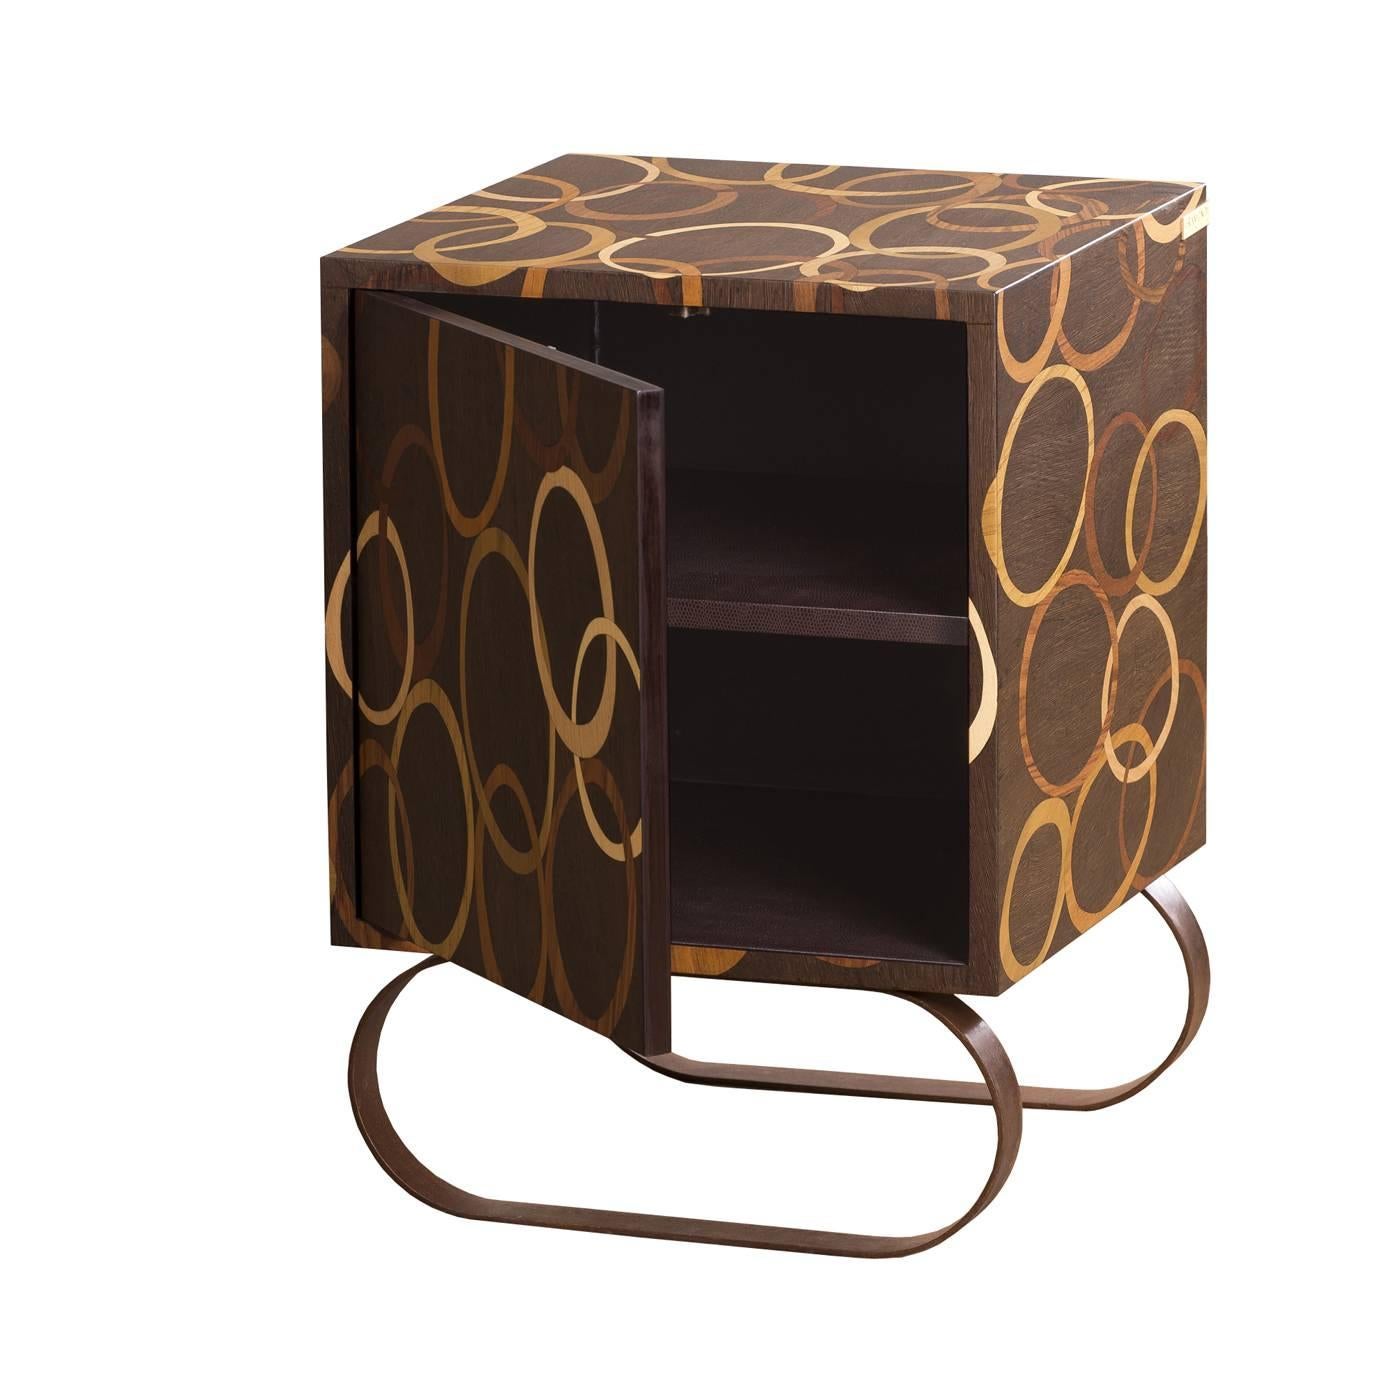 This bedside table has one door which opens up to reveal a single interior shelf. The multi-layer poplar structure serves as the base for the exquisite hand-made pattern on the exterior, achieved using an ancient inlaid wood technique. The woods